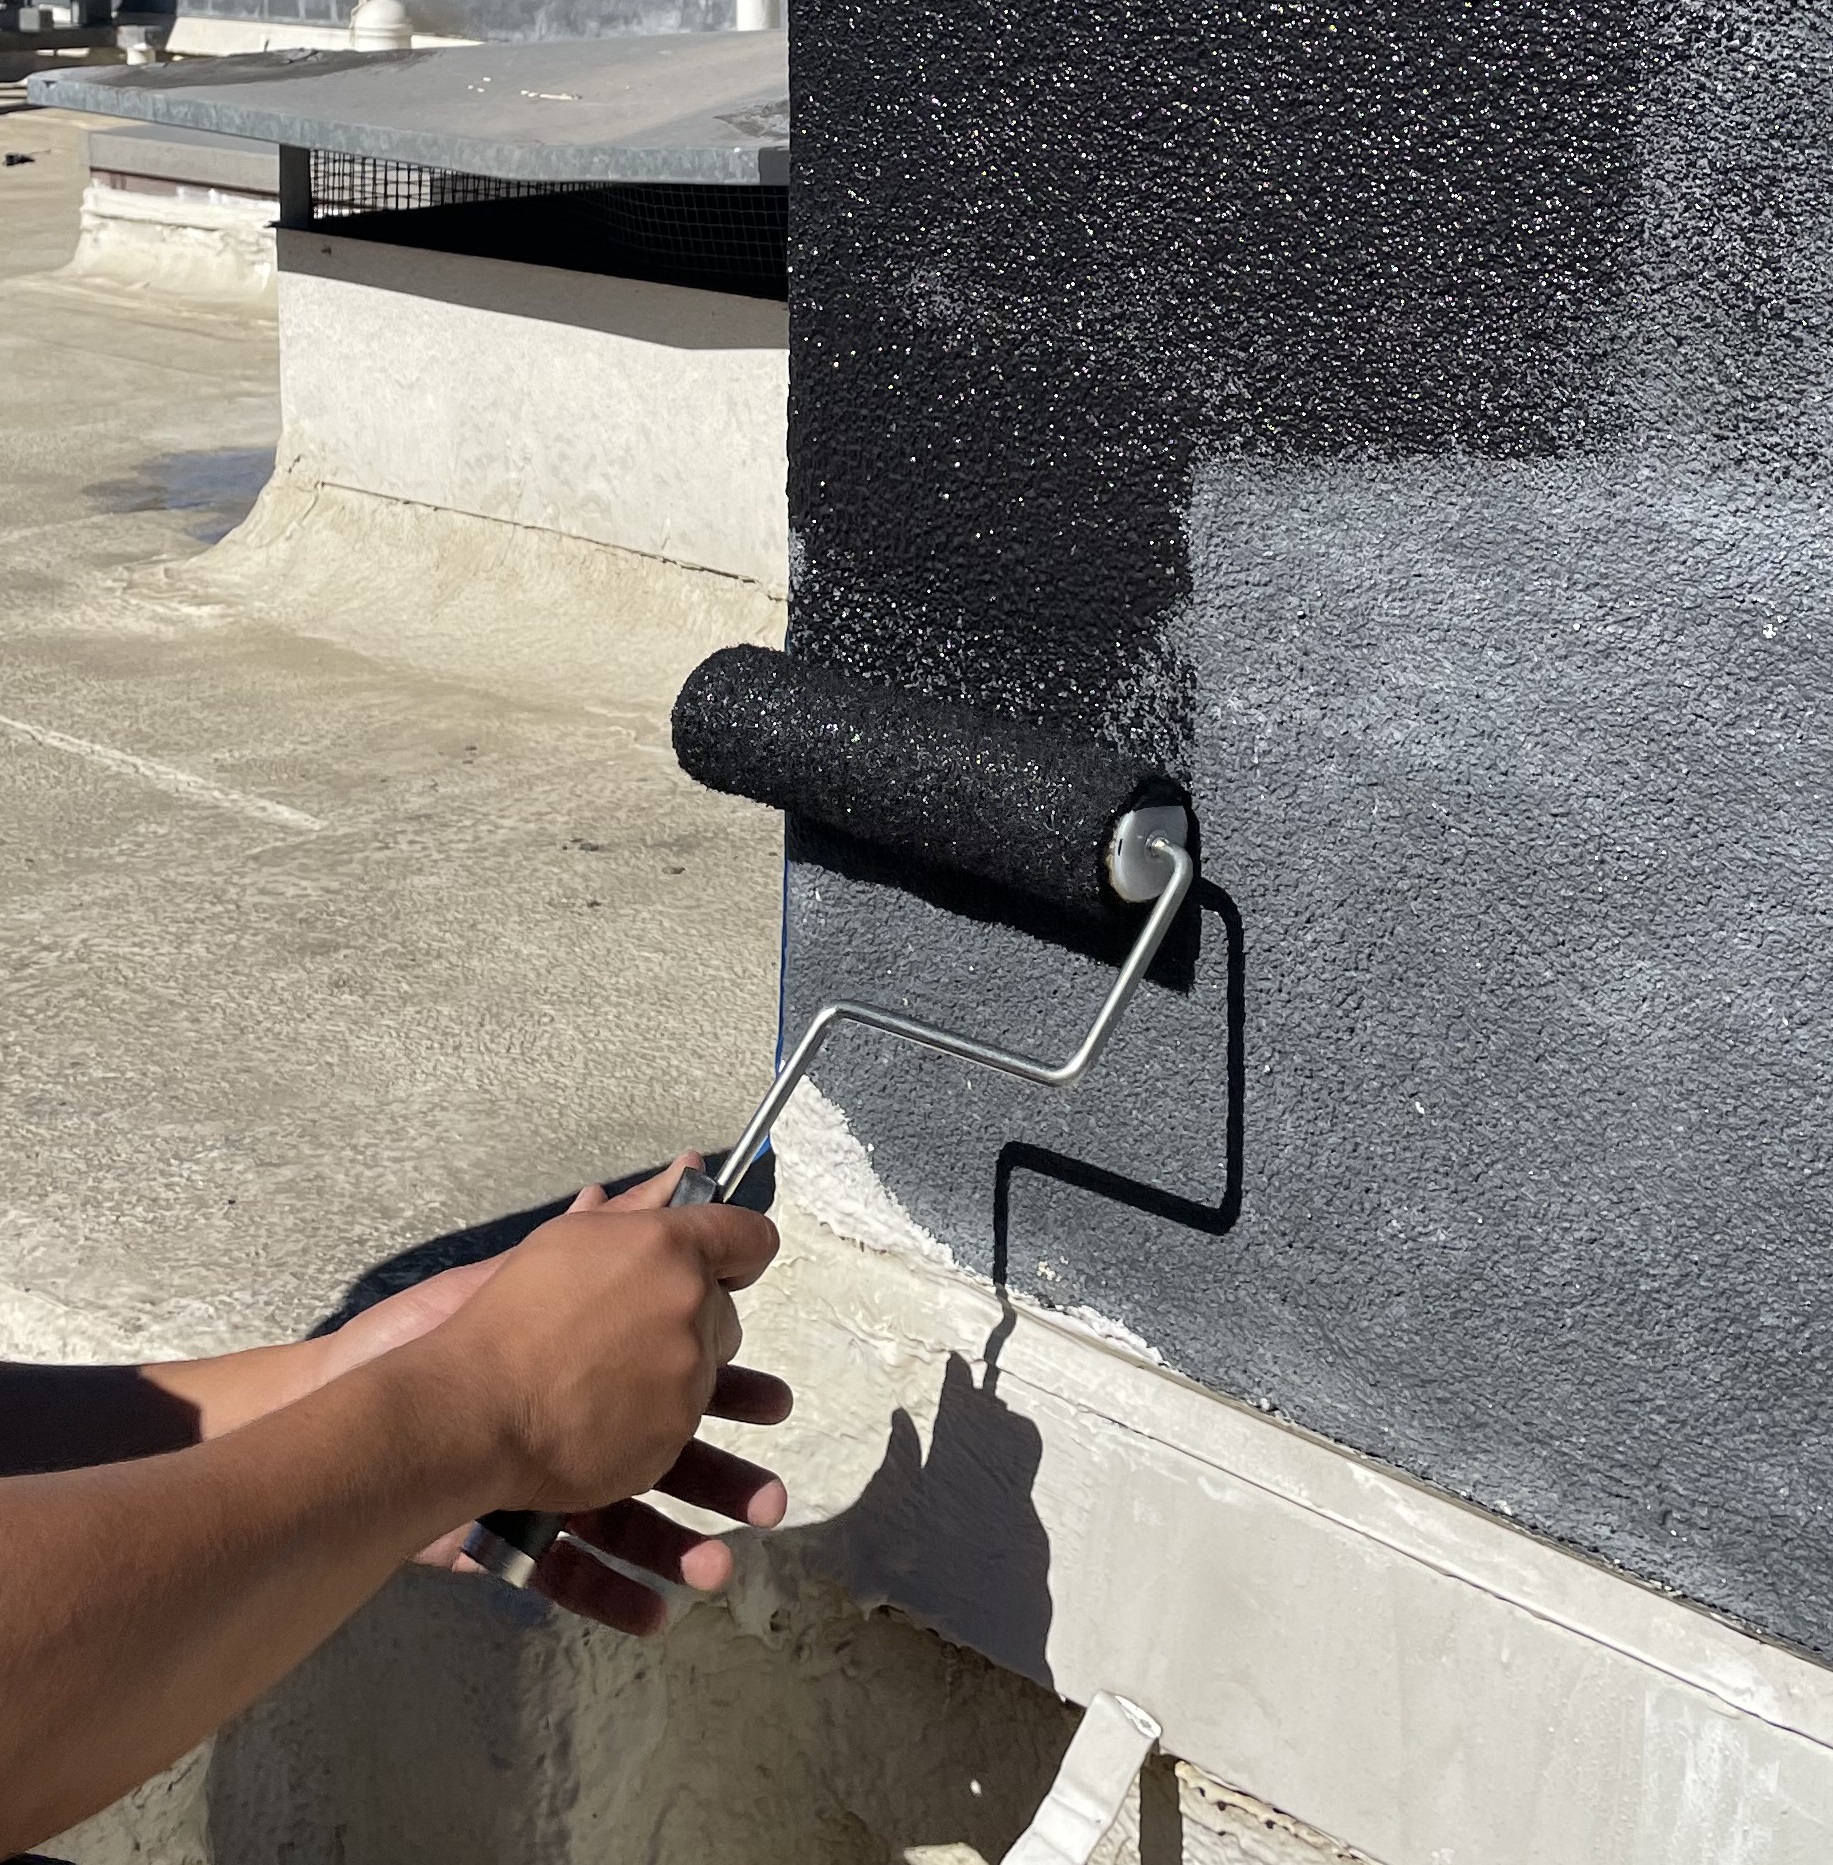 ConcealFab PIM Shield Mitigation Paint from Columbia Safety